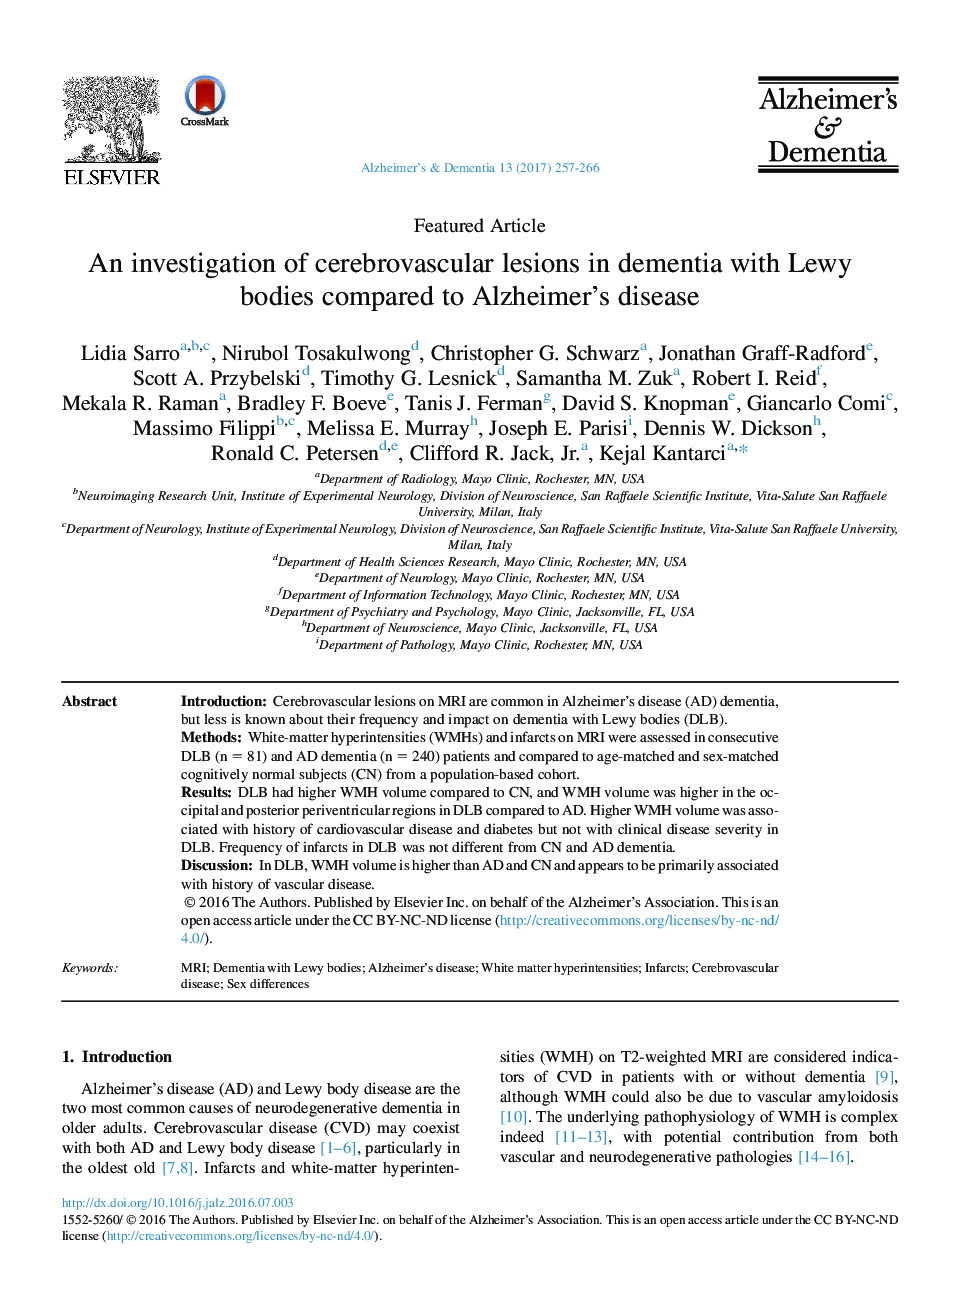 Featured ArticleAn investigation of cerebrovascular lesions in dementia with Lewy bodies compared to Alzheimer's disease